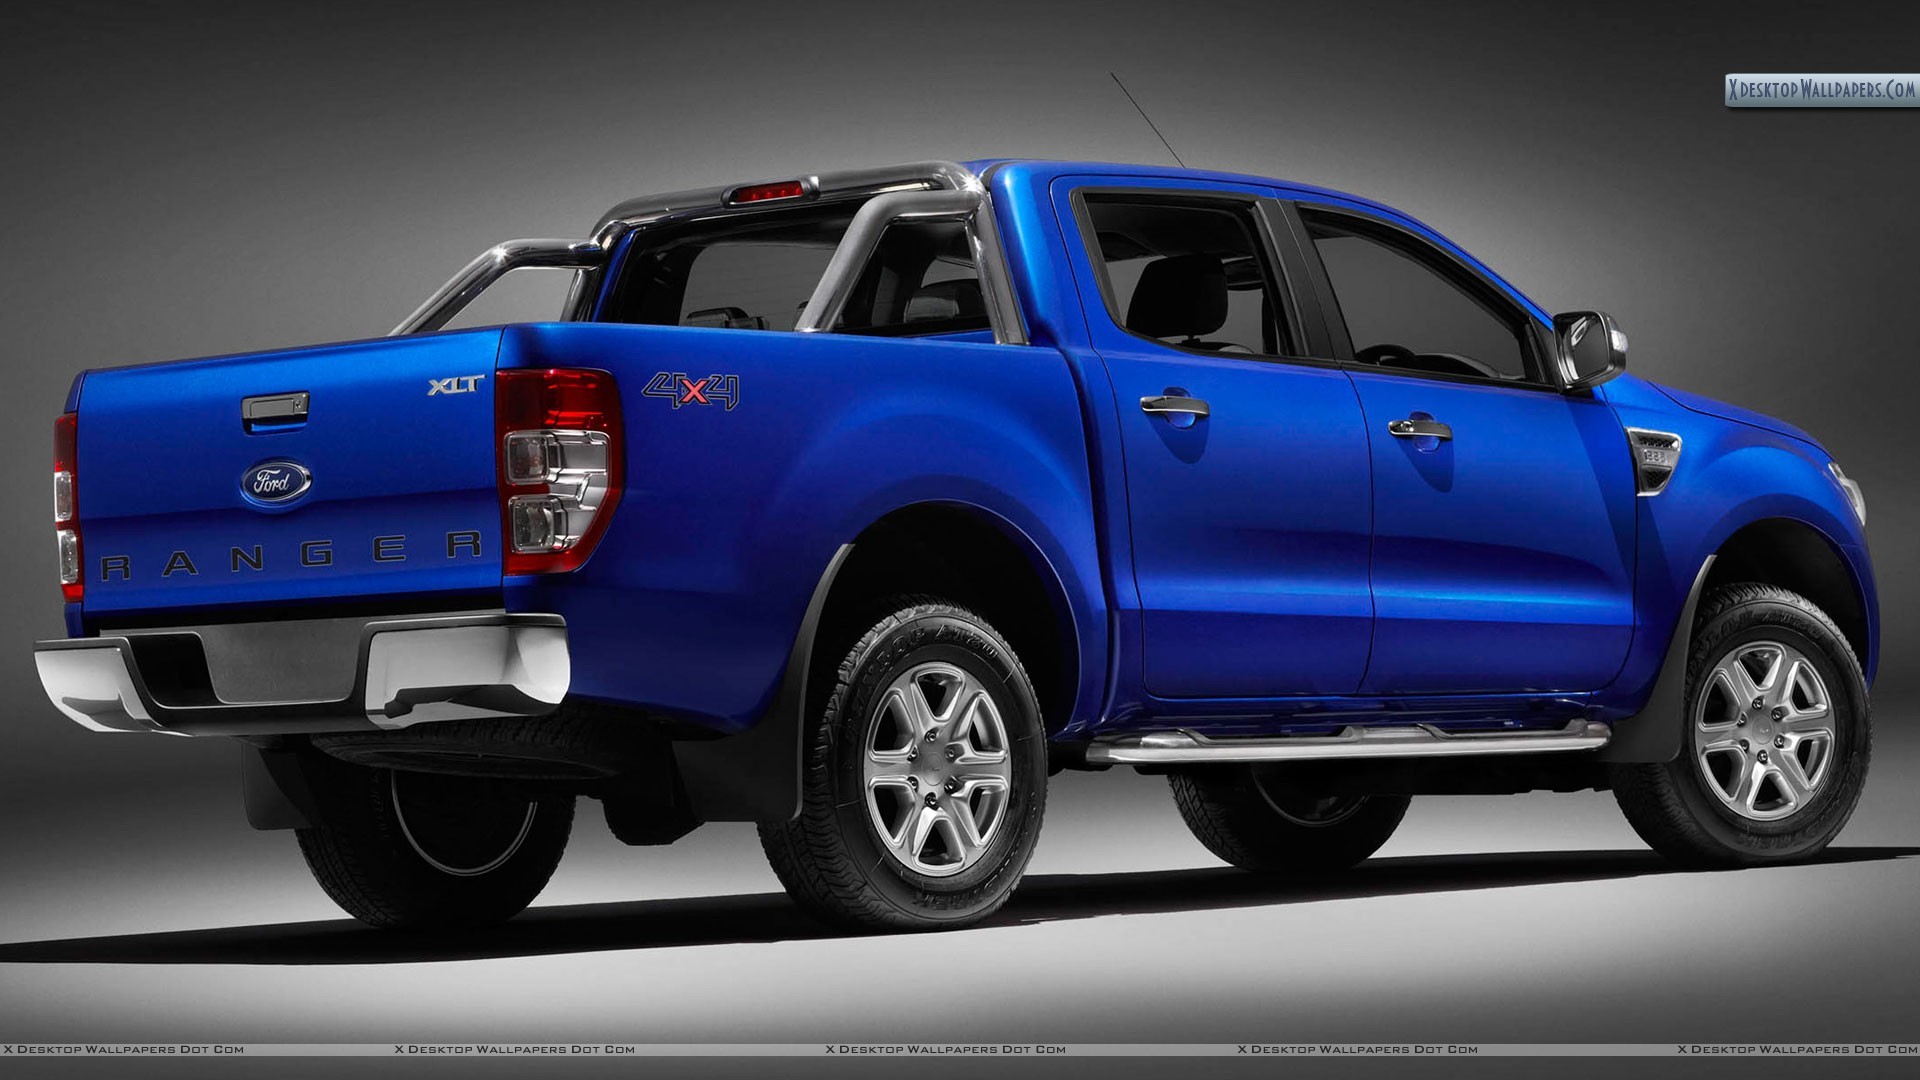 1920x1080 You are viewing wallpaper titled "Ford Ranger ...